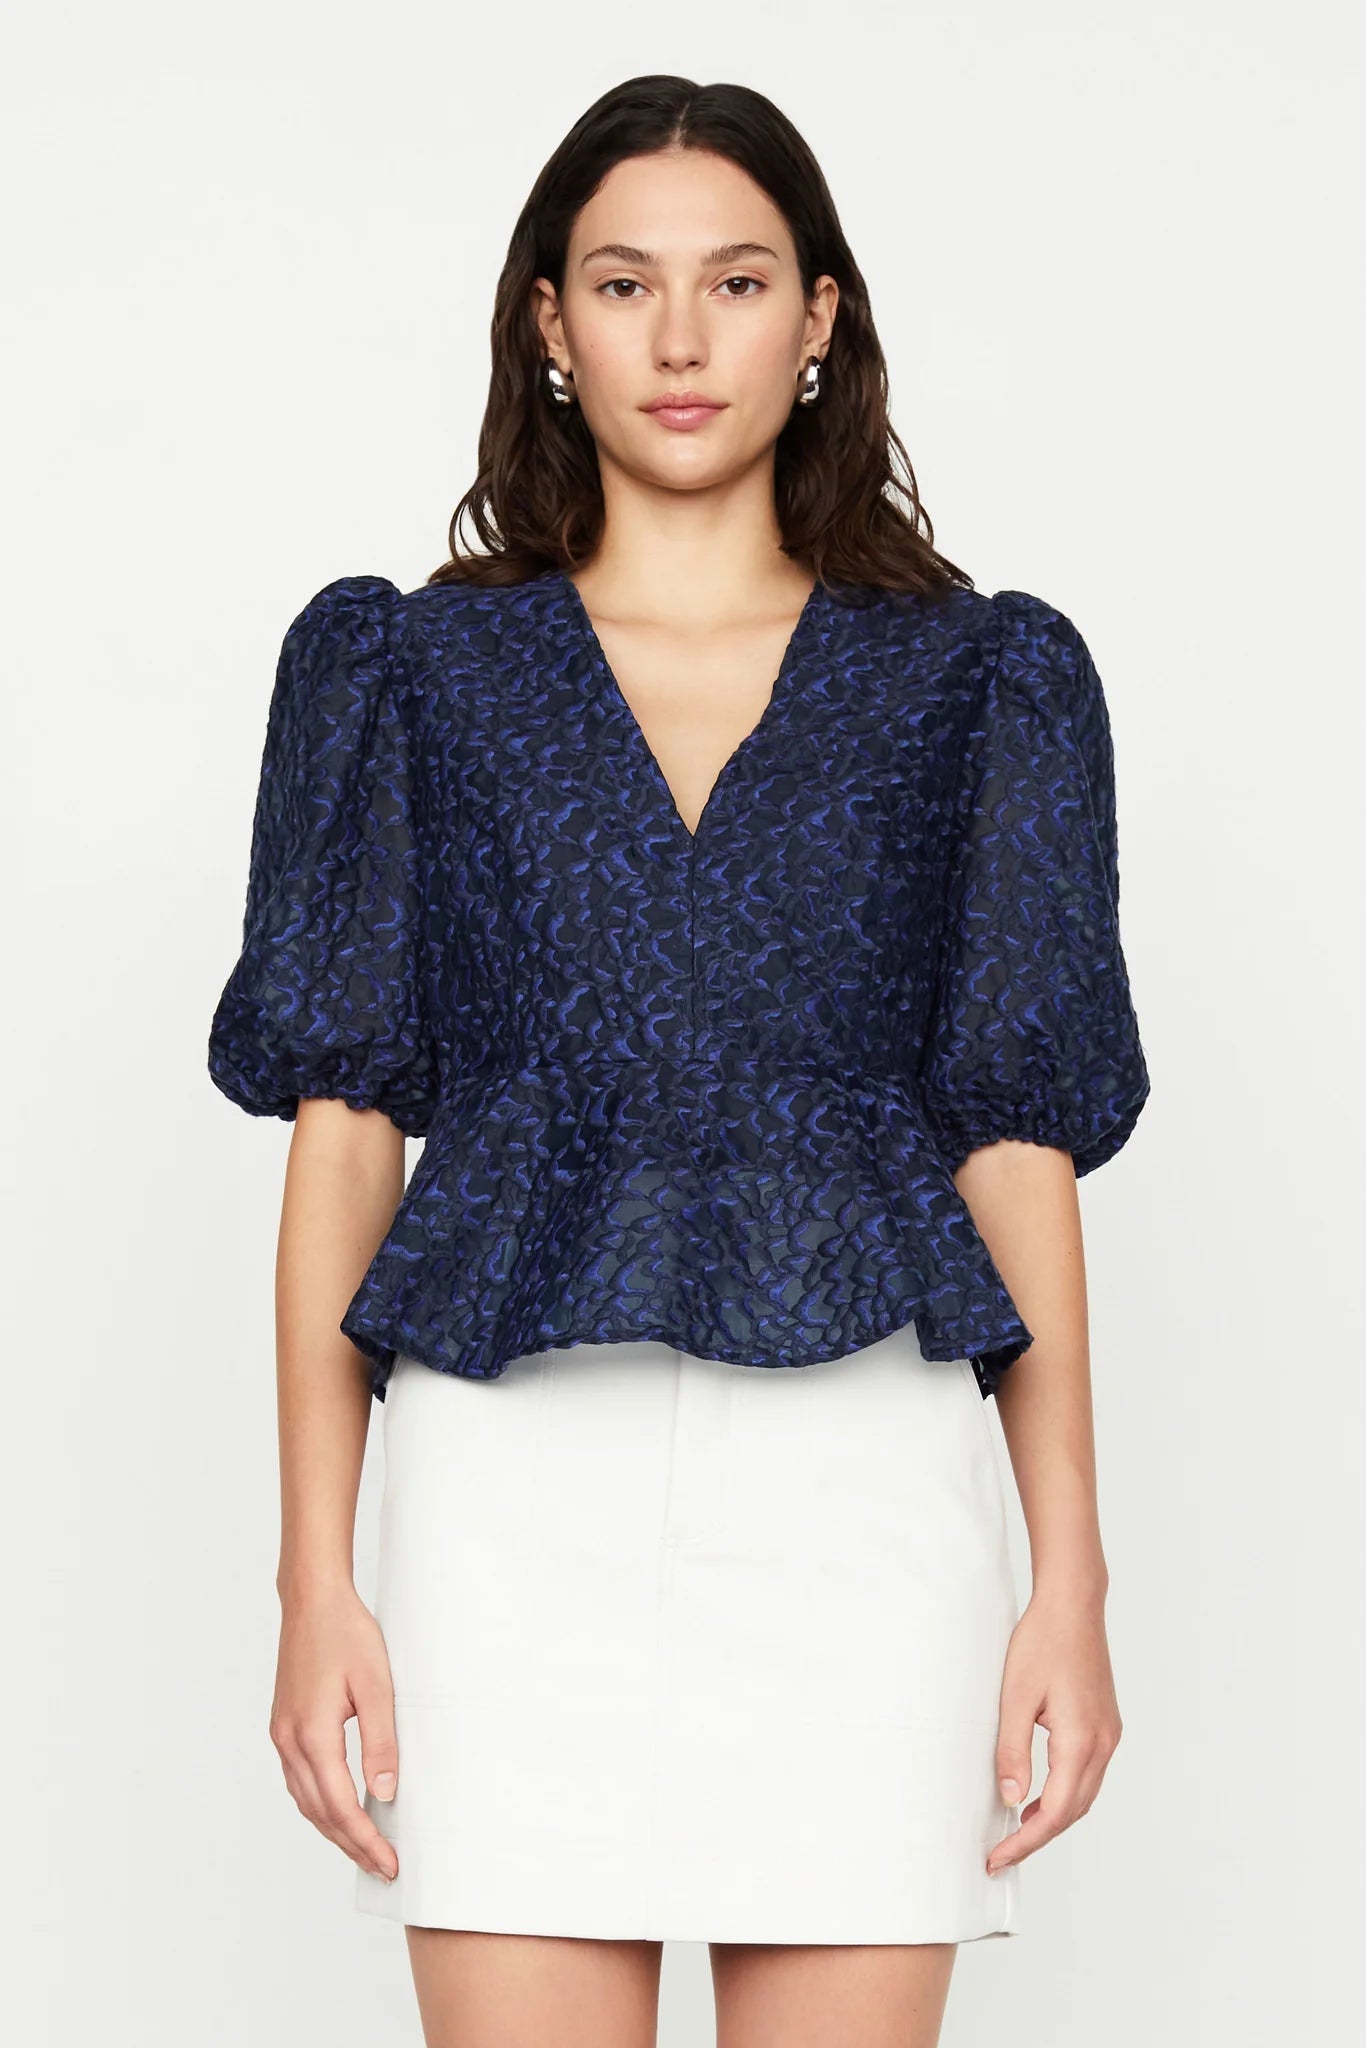 Marie Oliver Everly Top in Sapphire Plume - Estilo Boutique